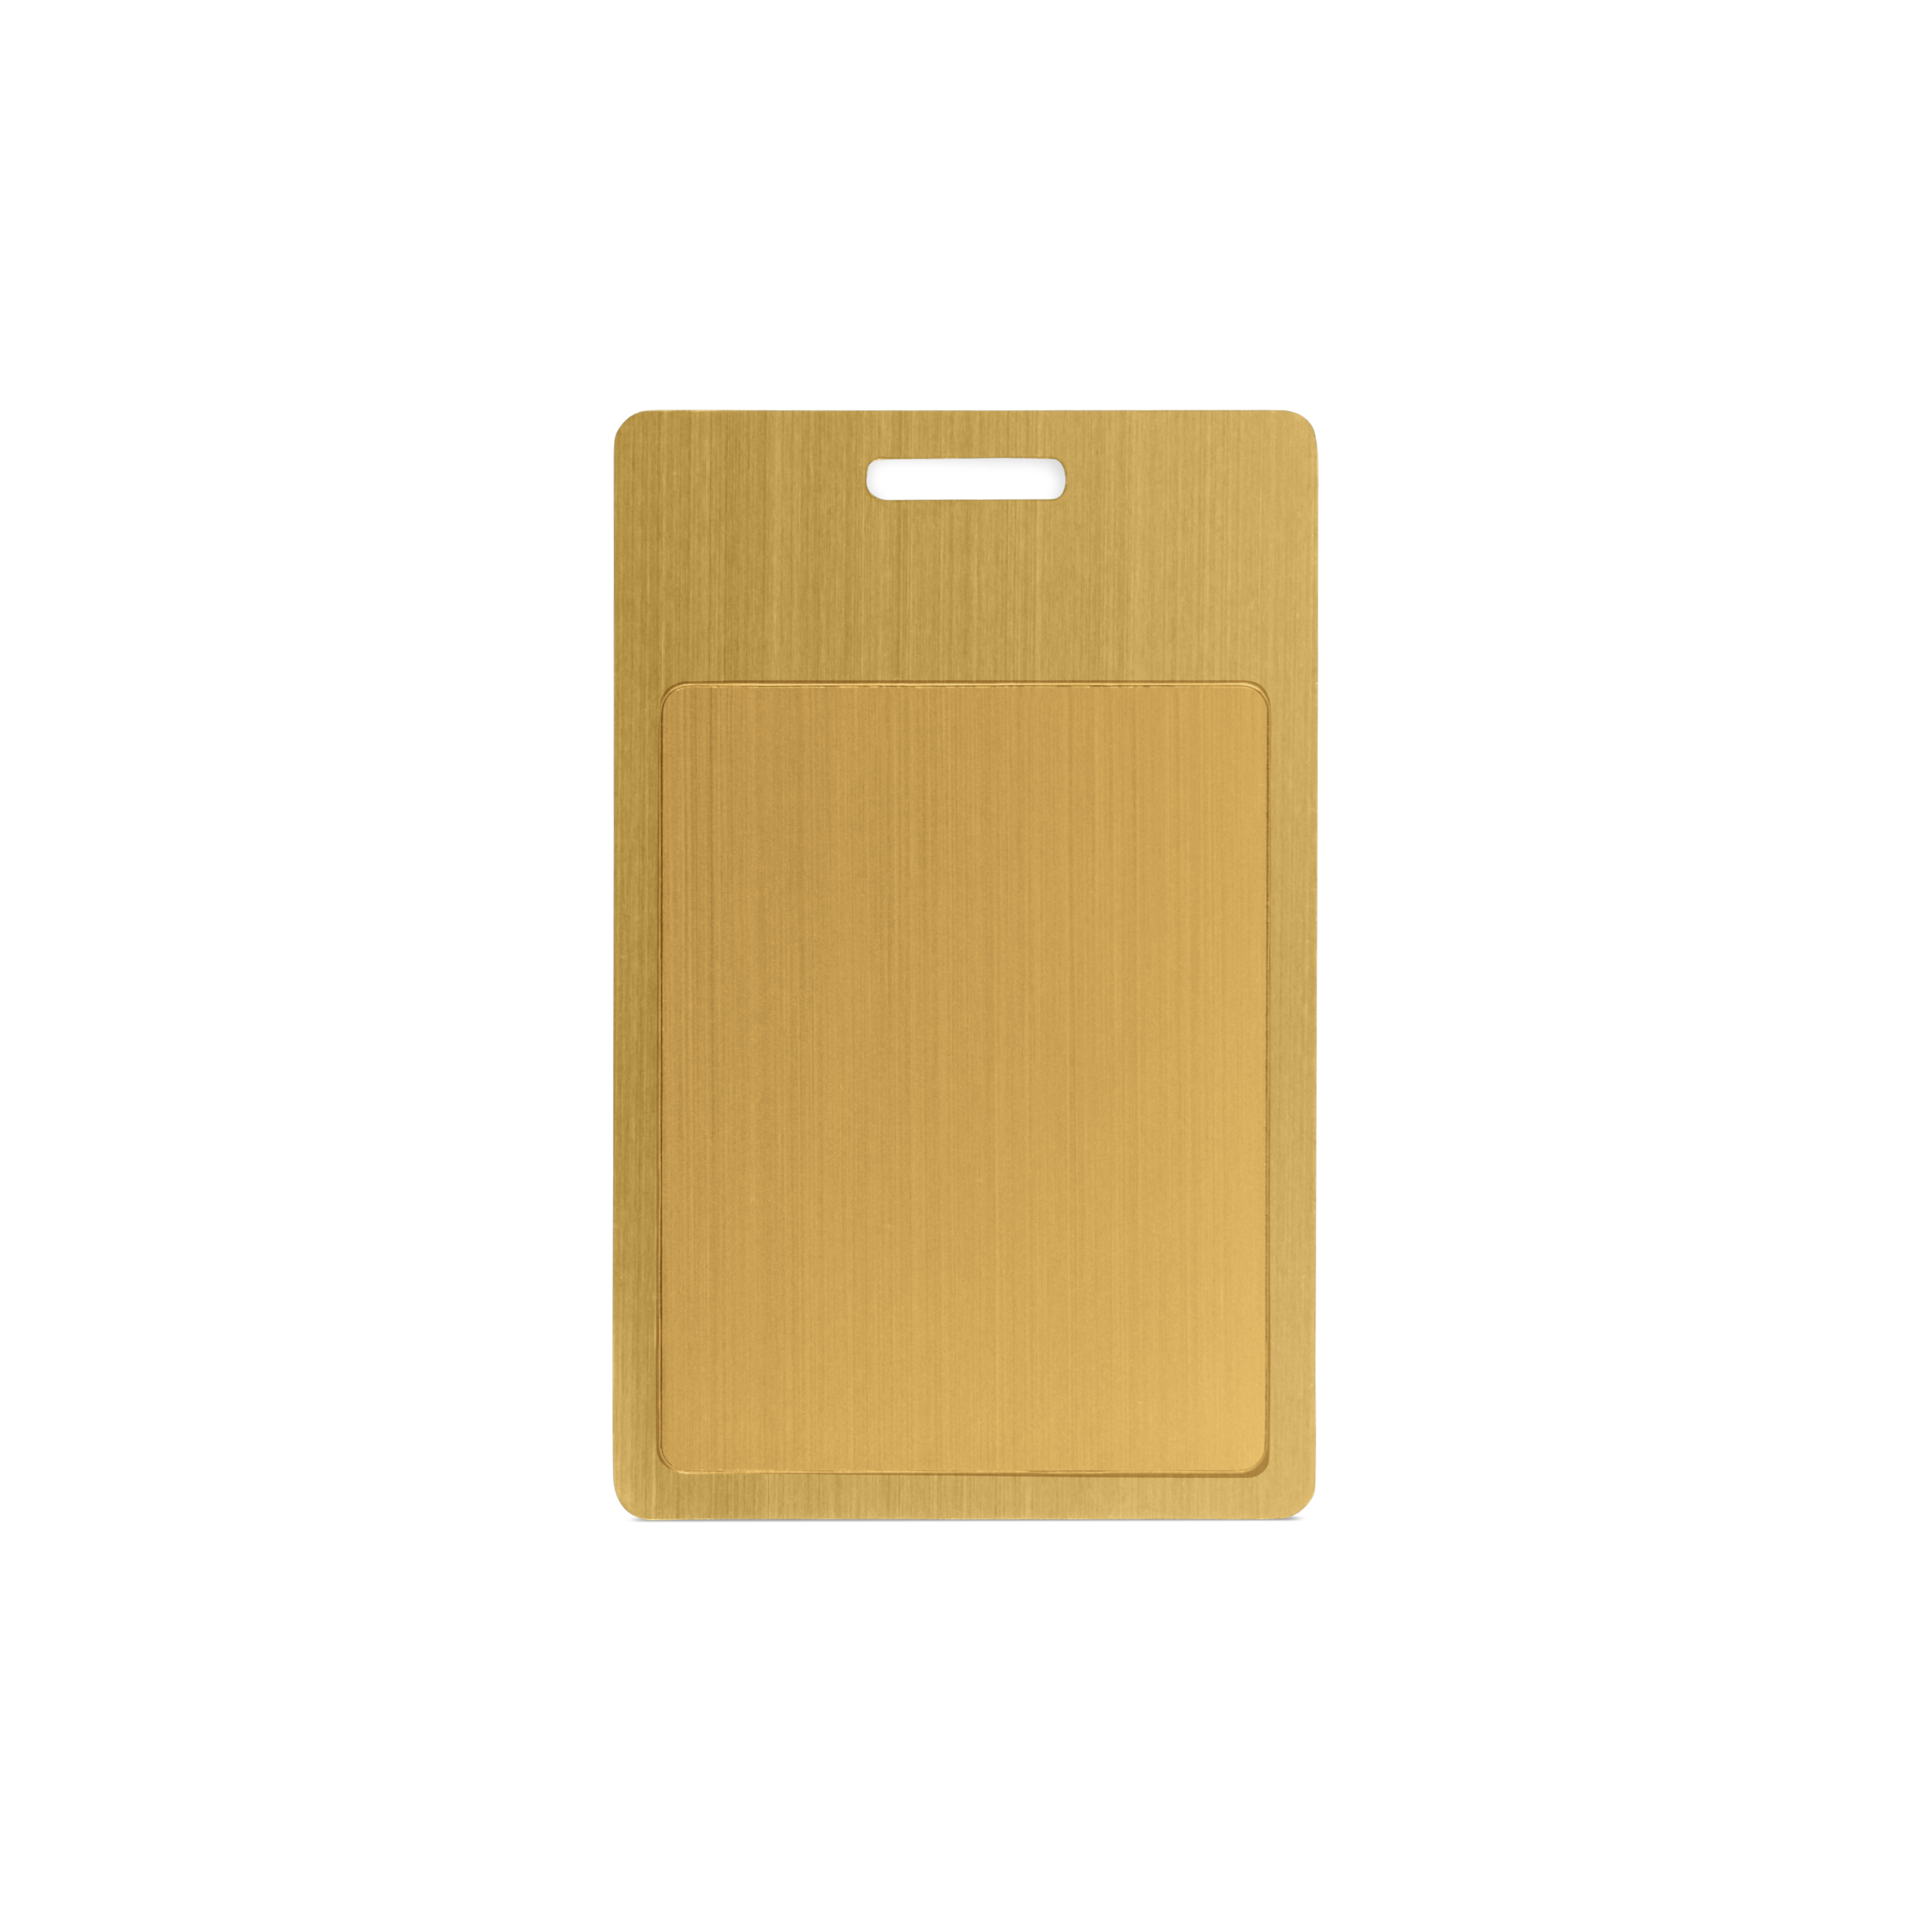 NFC card metal printed on both sides - 85,6 x 54 mm - NTAG213 - 180 bytes - gold - portrait format with slot